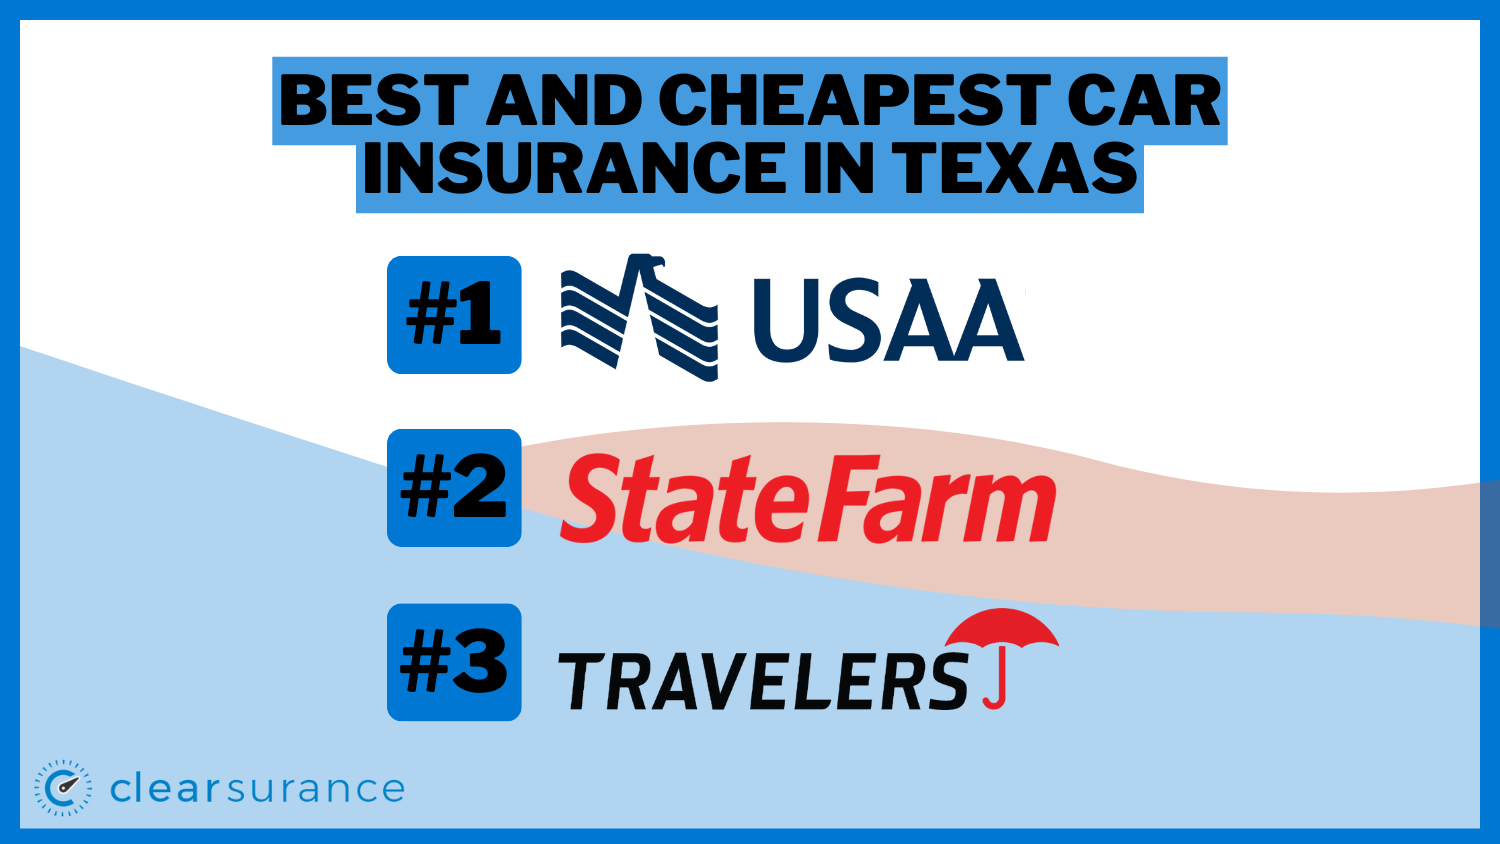 Best and Cheapest Car Insurance in Texas: USAA, State Farm, Travelers